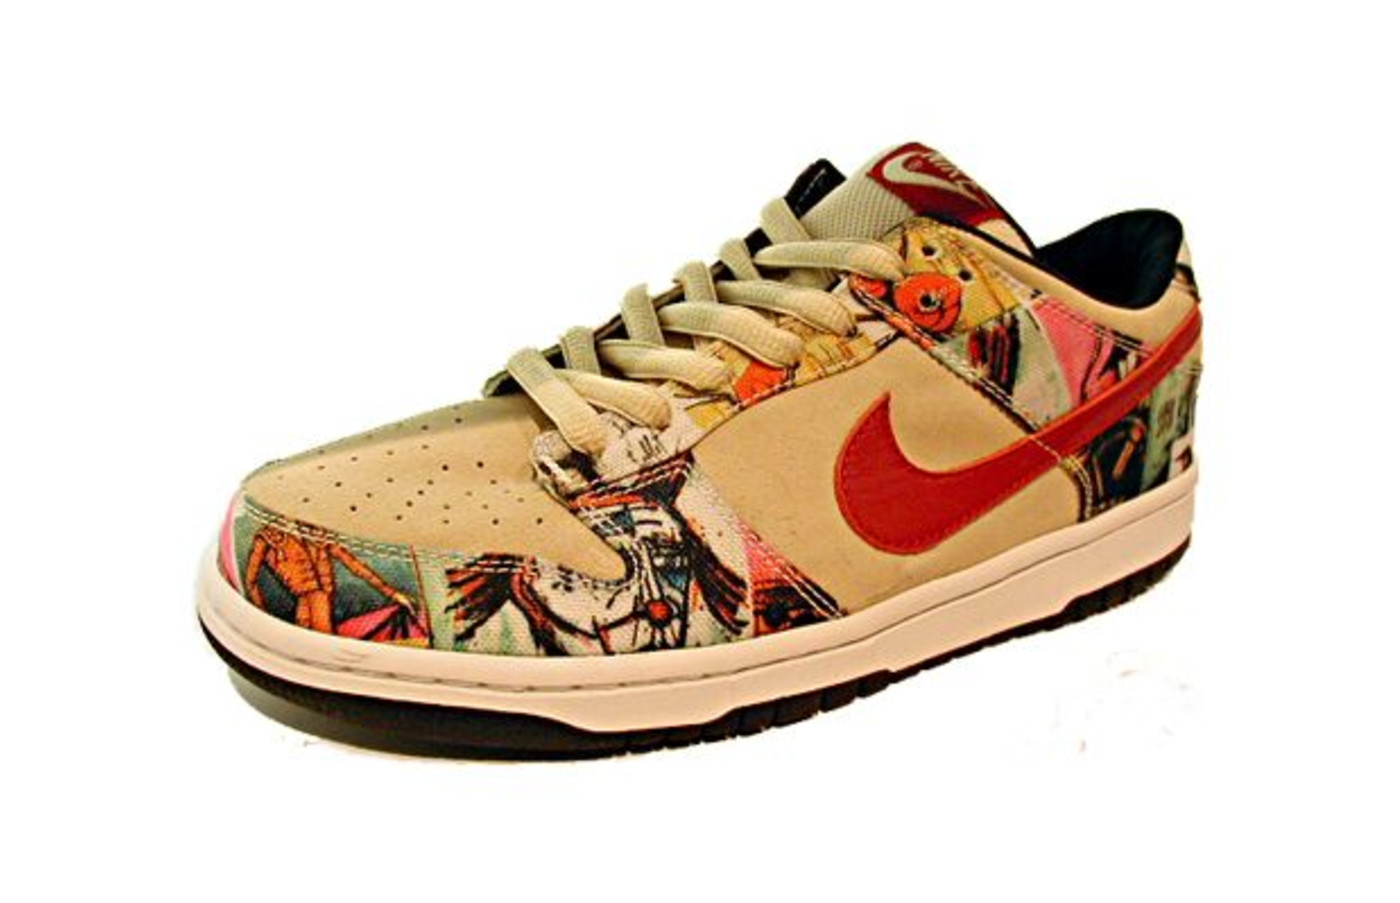 best sb dunks of all time